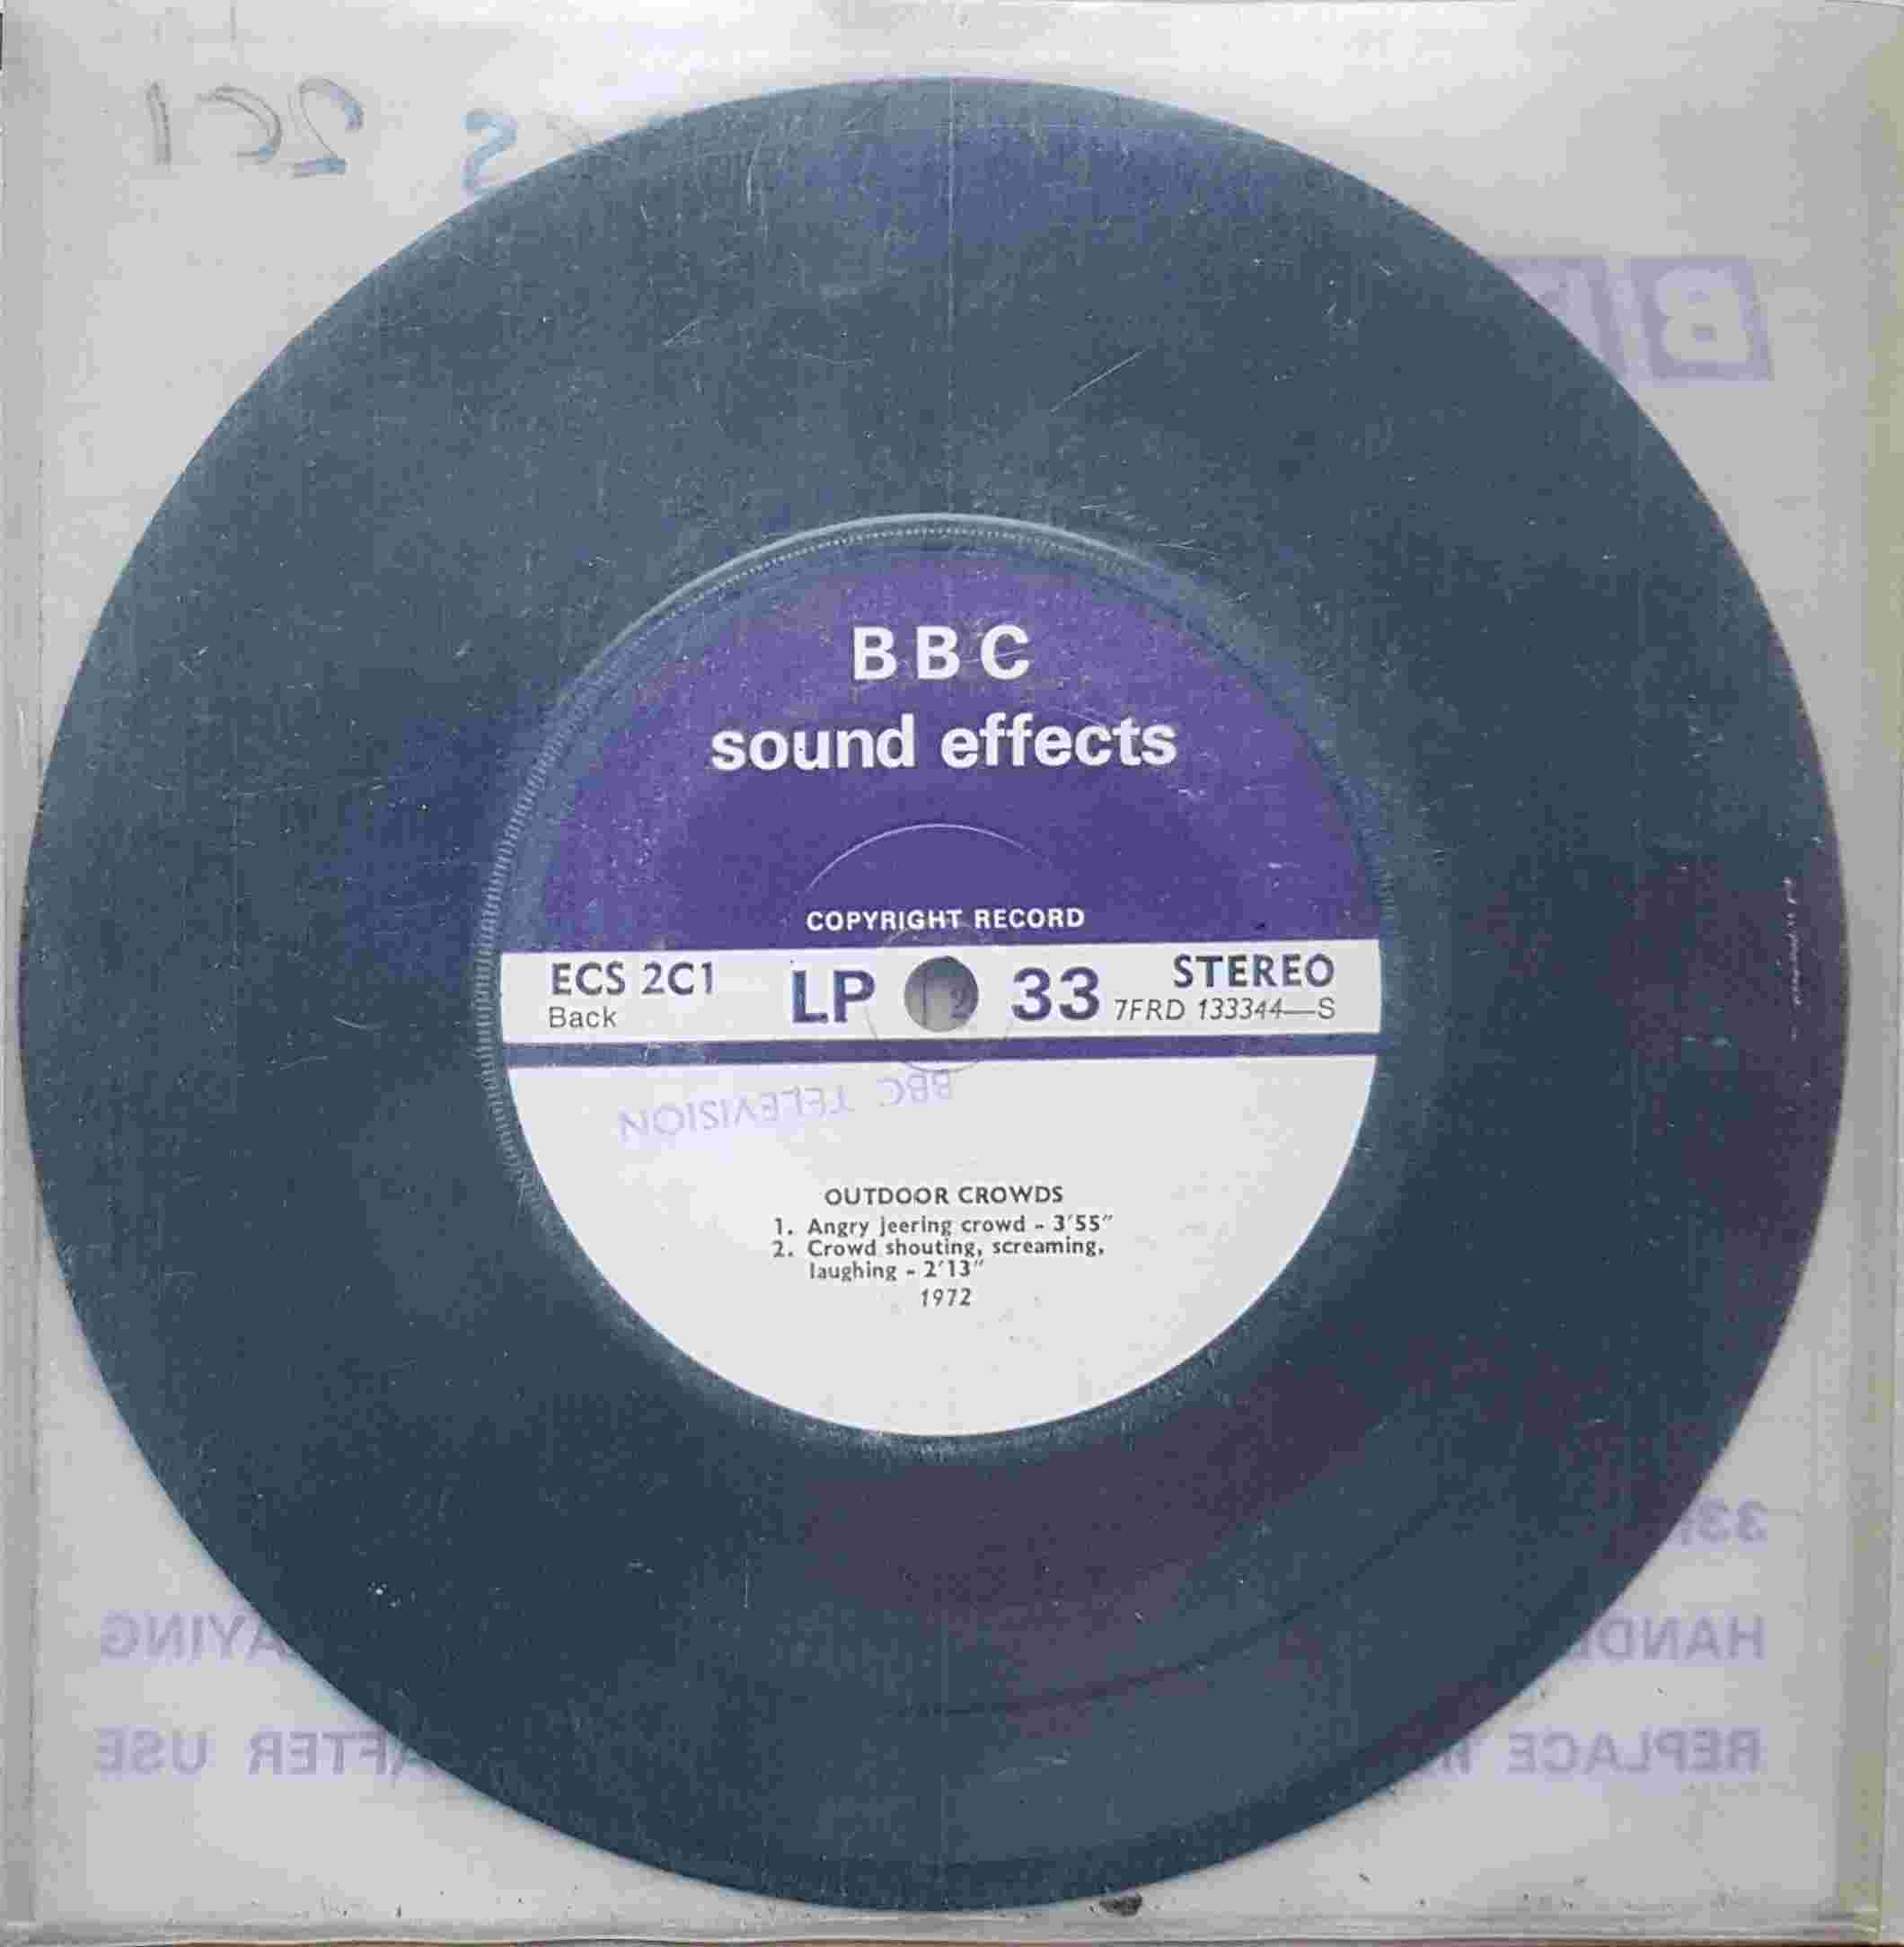 Picture of ECS 2C1 Outdoor crowds by artist Not registered from the BBC records and Tapes library